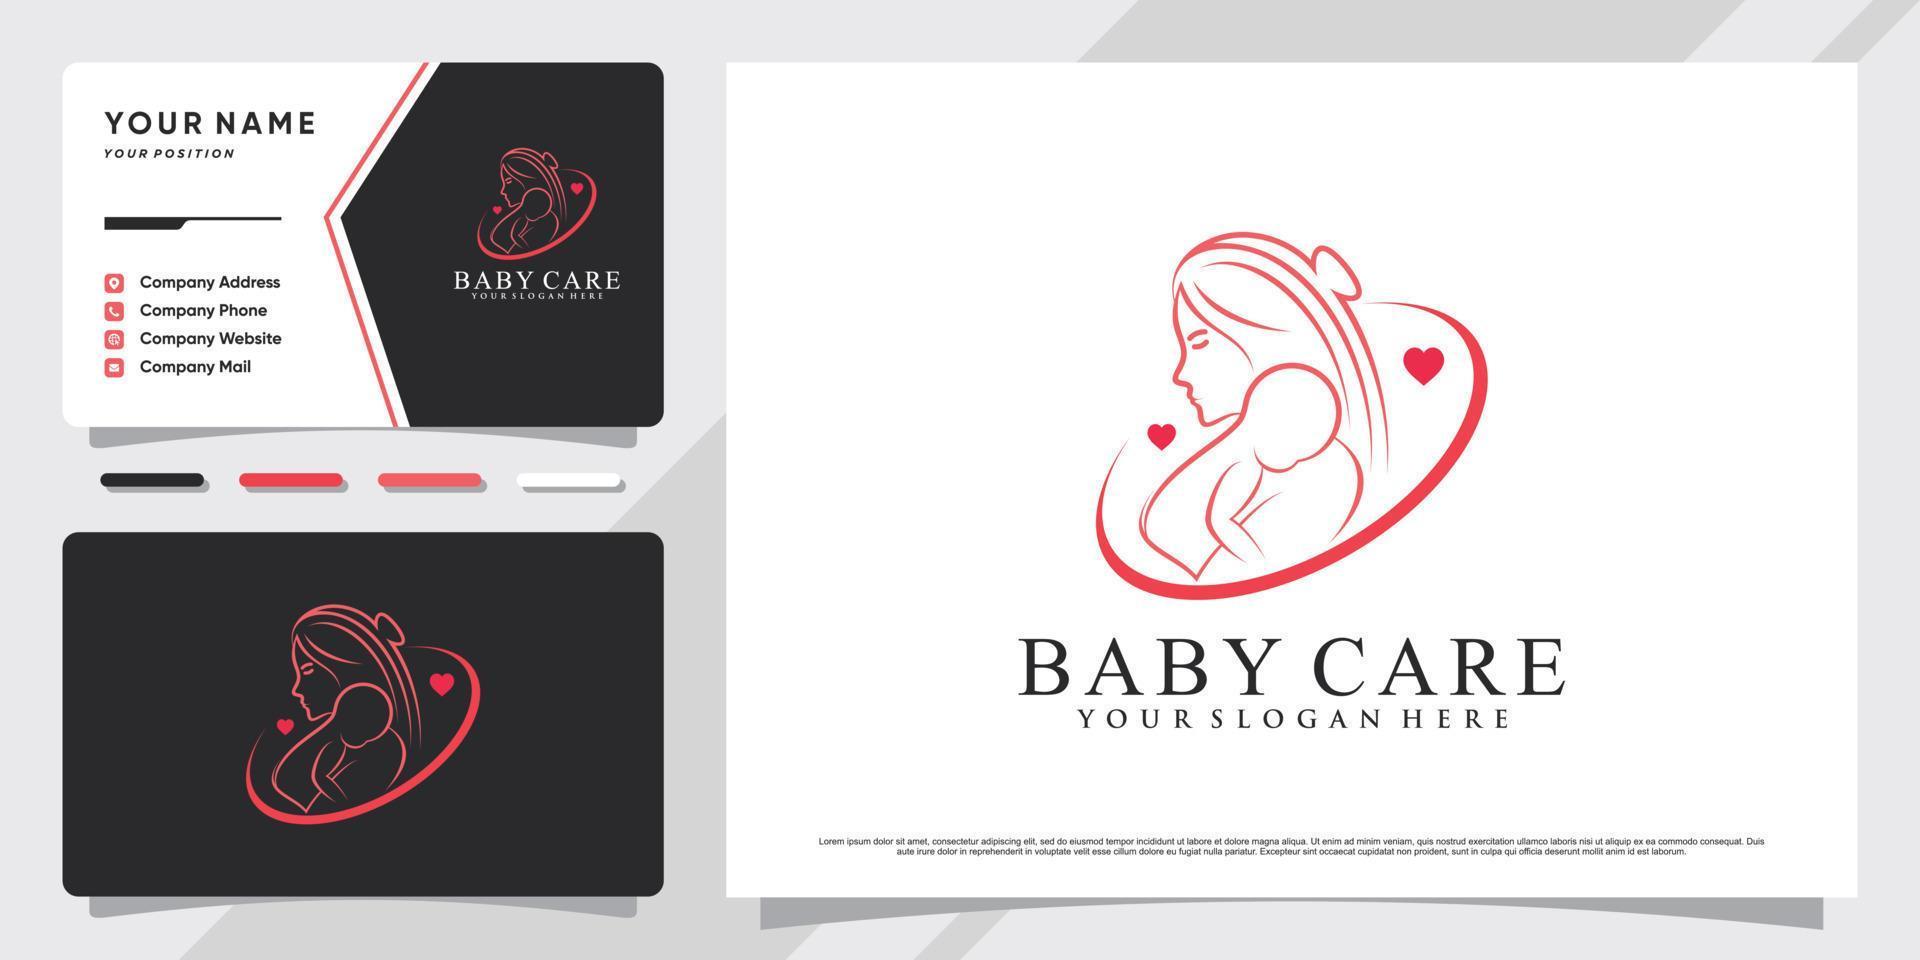 Baby care logo with creative element and business card design Premium Vector